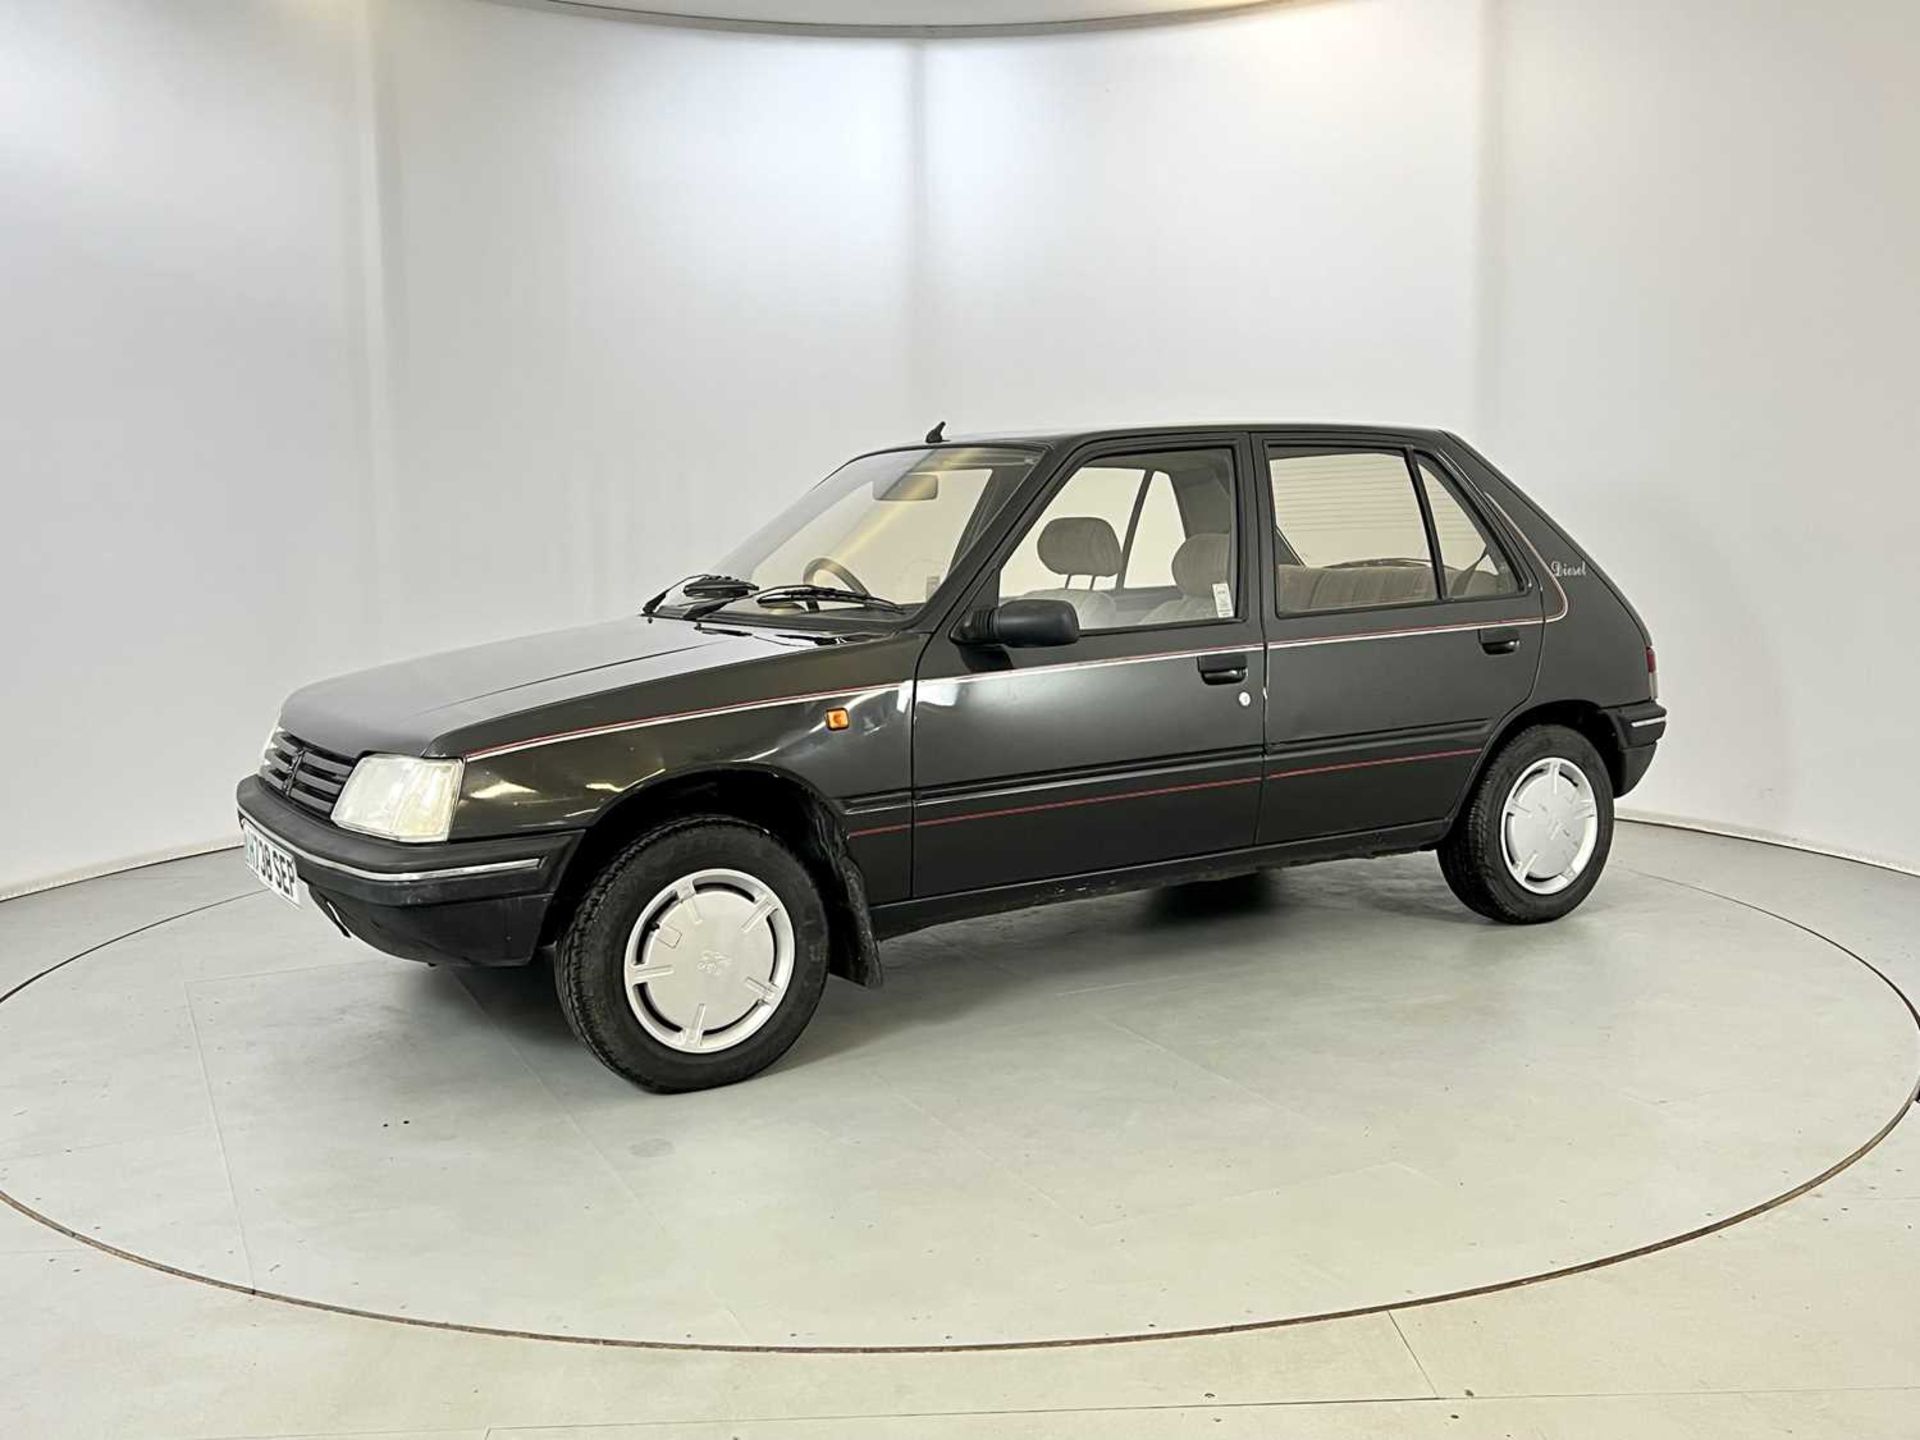 1990 Peugeot 205 GRD - Image 4 of 33